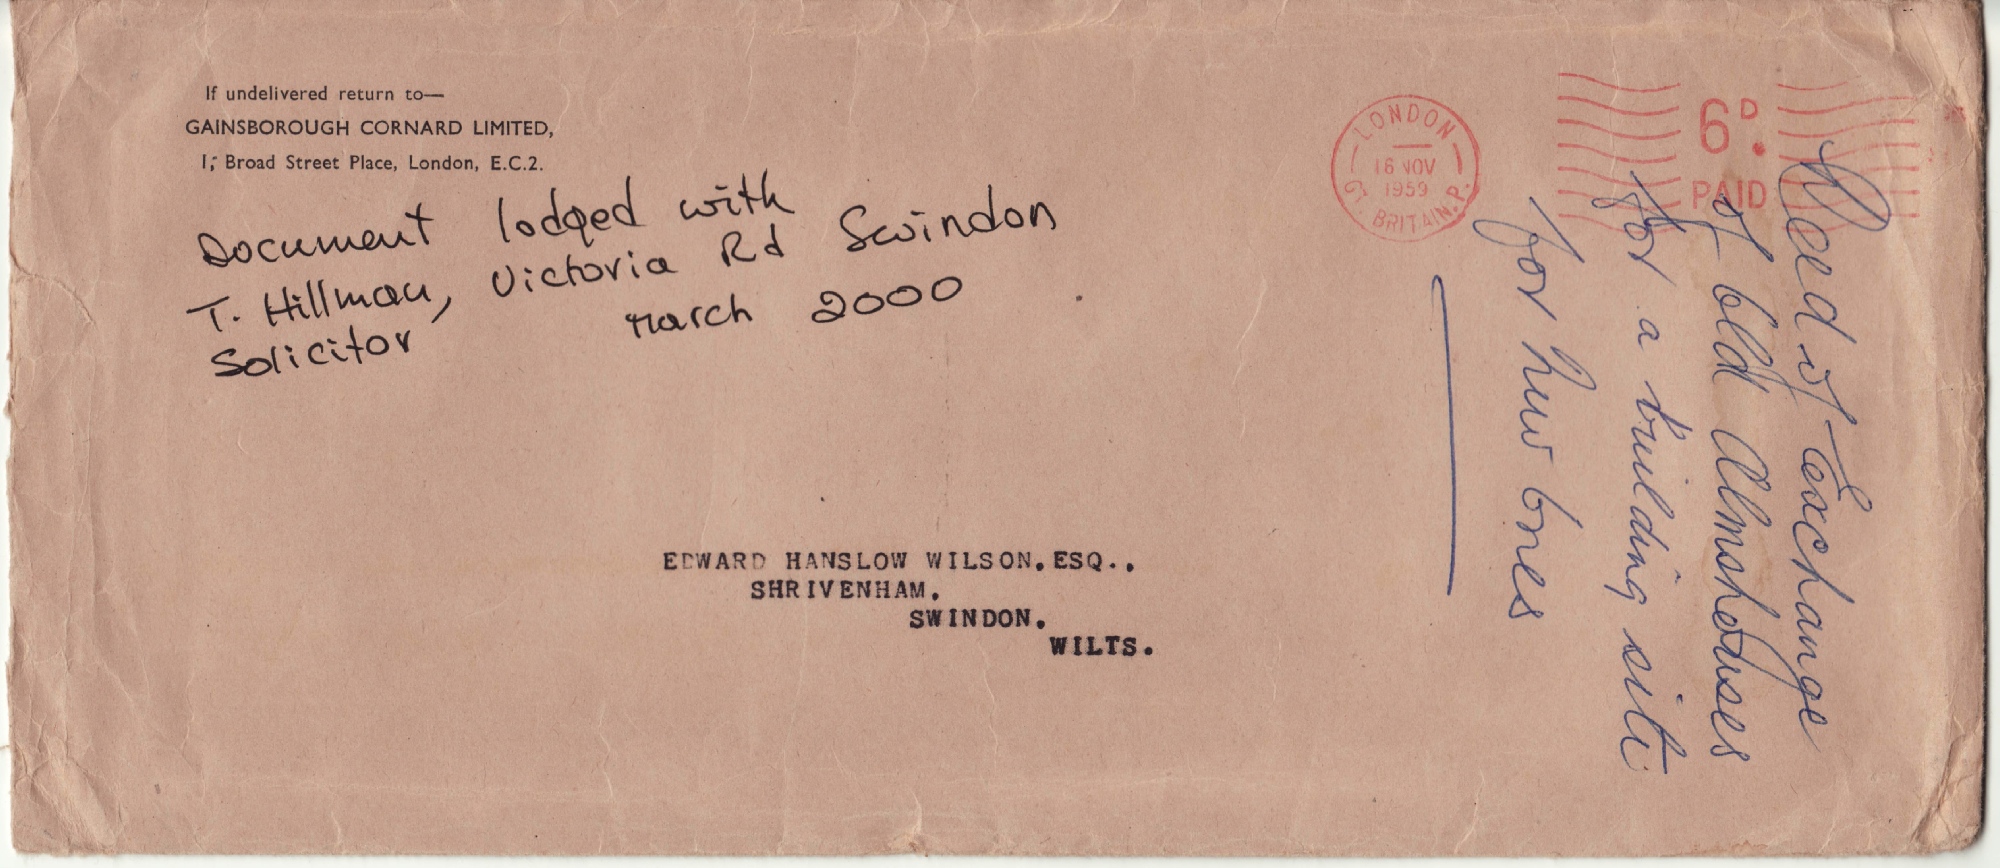 Envelope from 1959